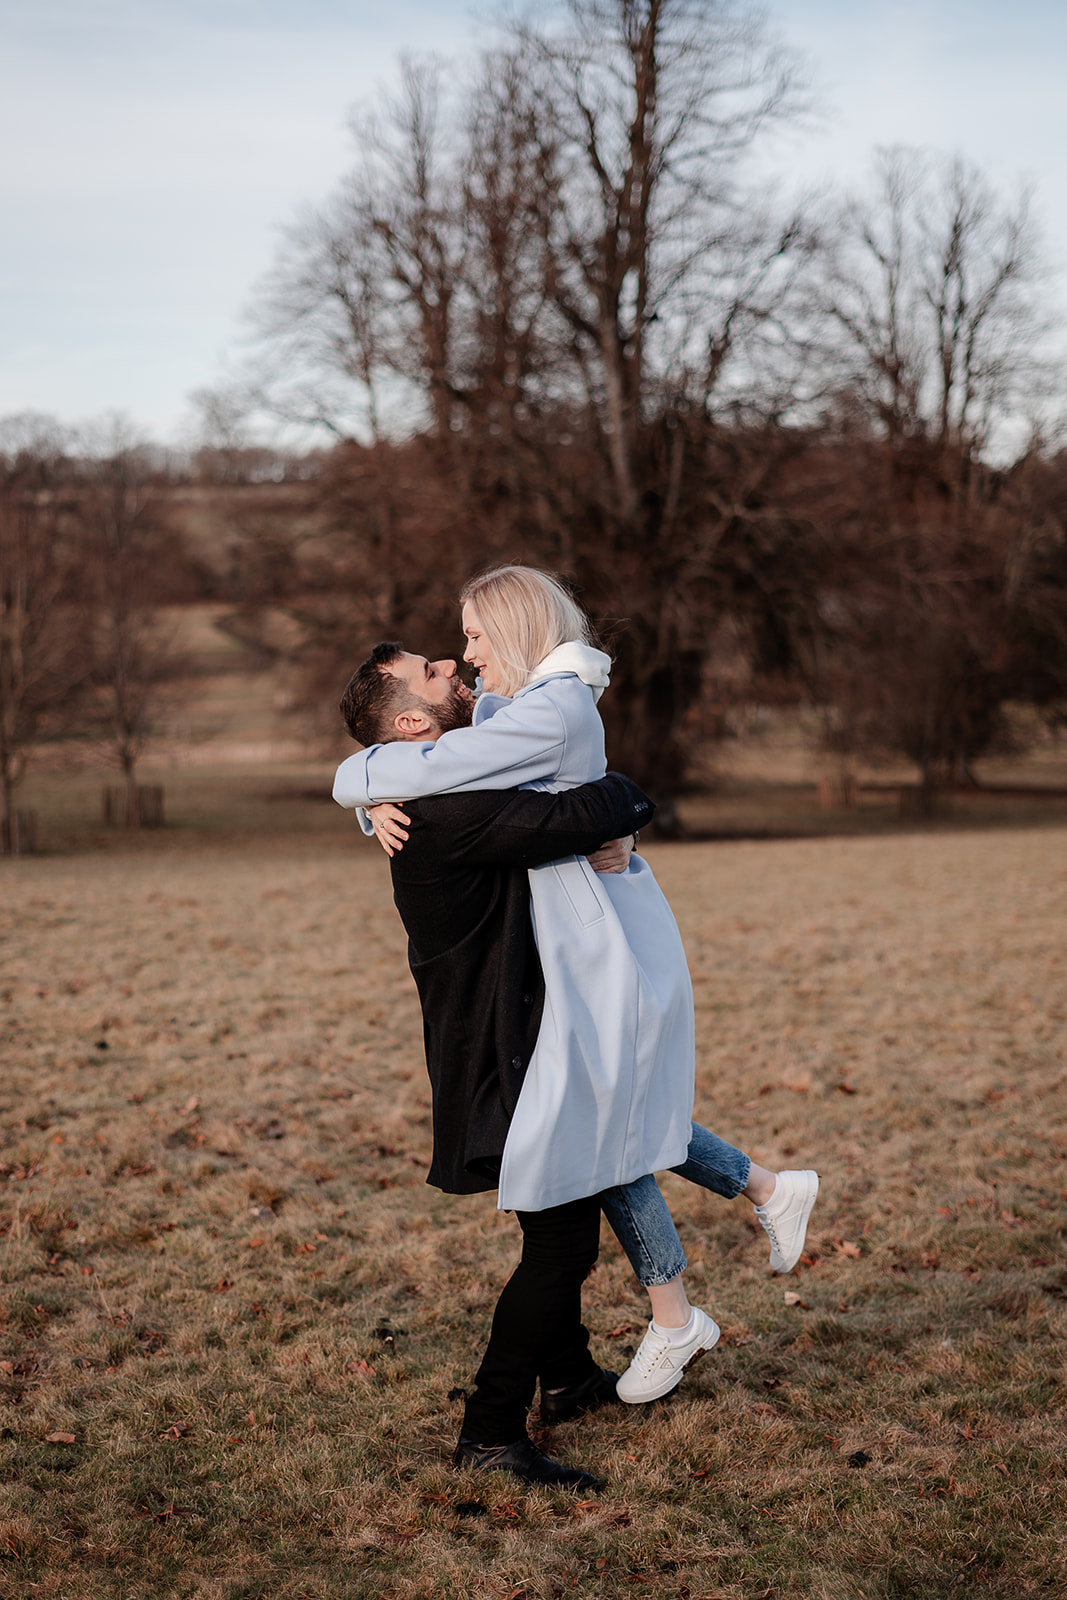 A groom to be lifts his fiance up in a tight embrace on their Hampshire engagement photoshoot